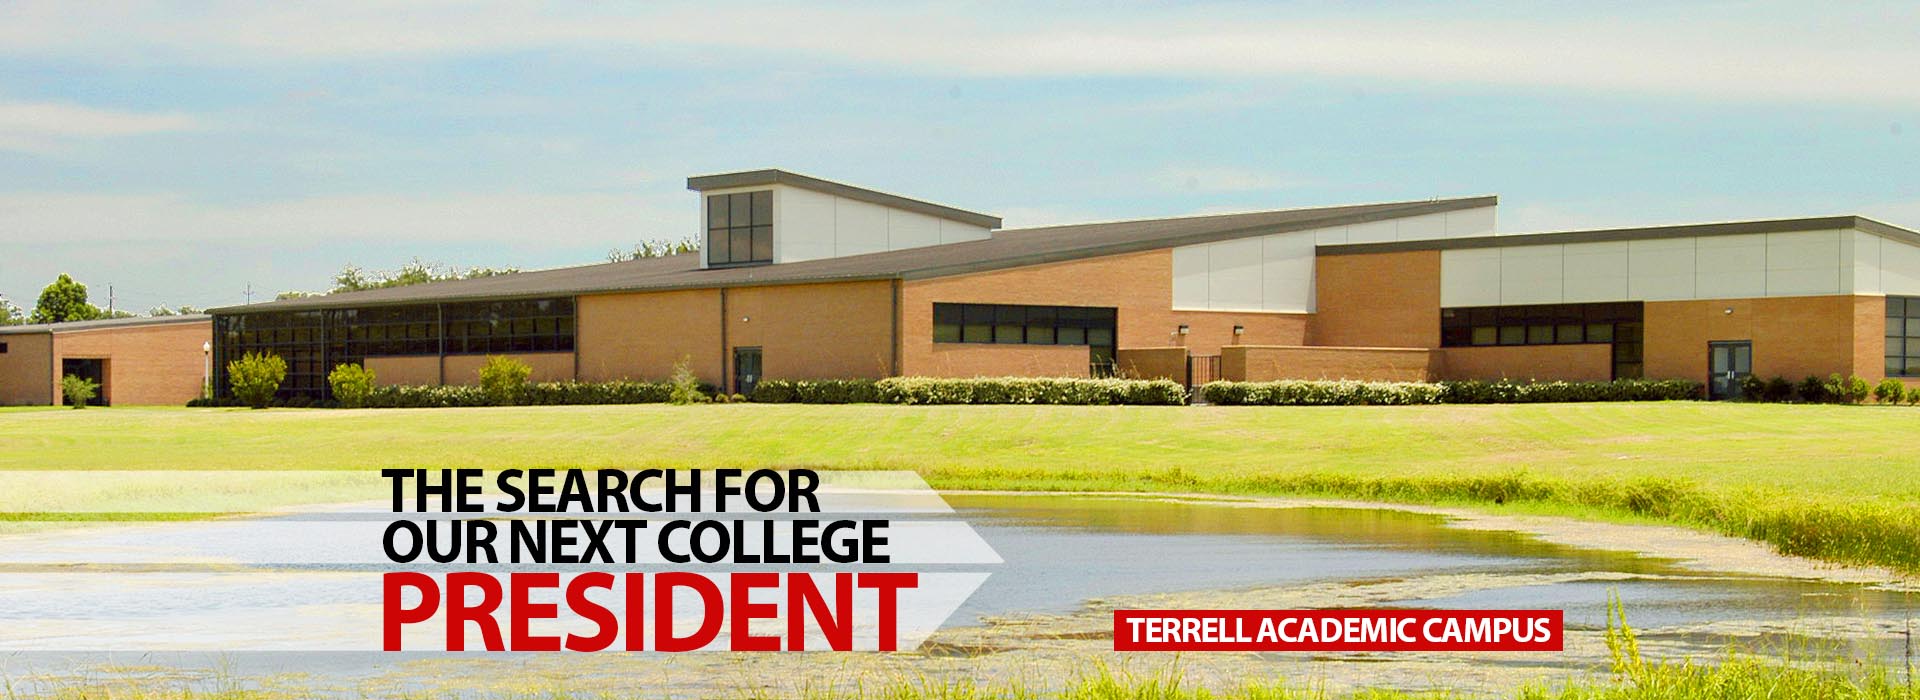 The search for our next college President - Terrell Academic Campus